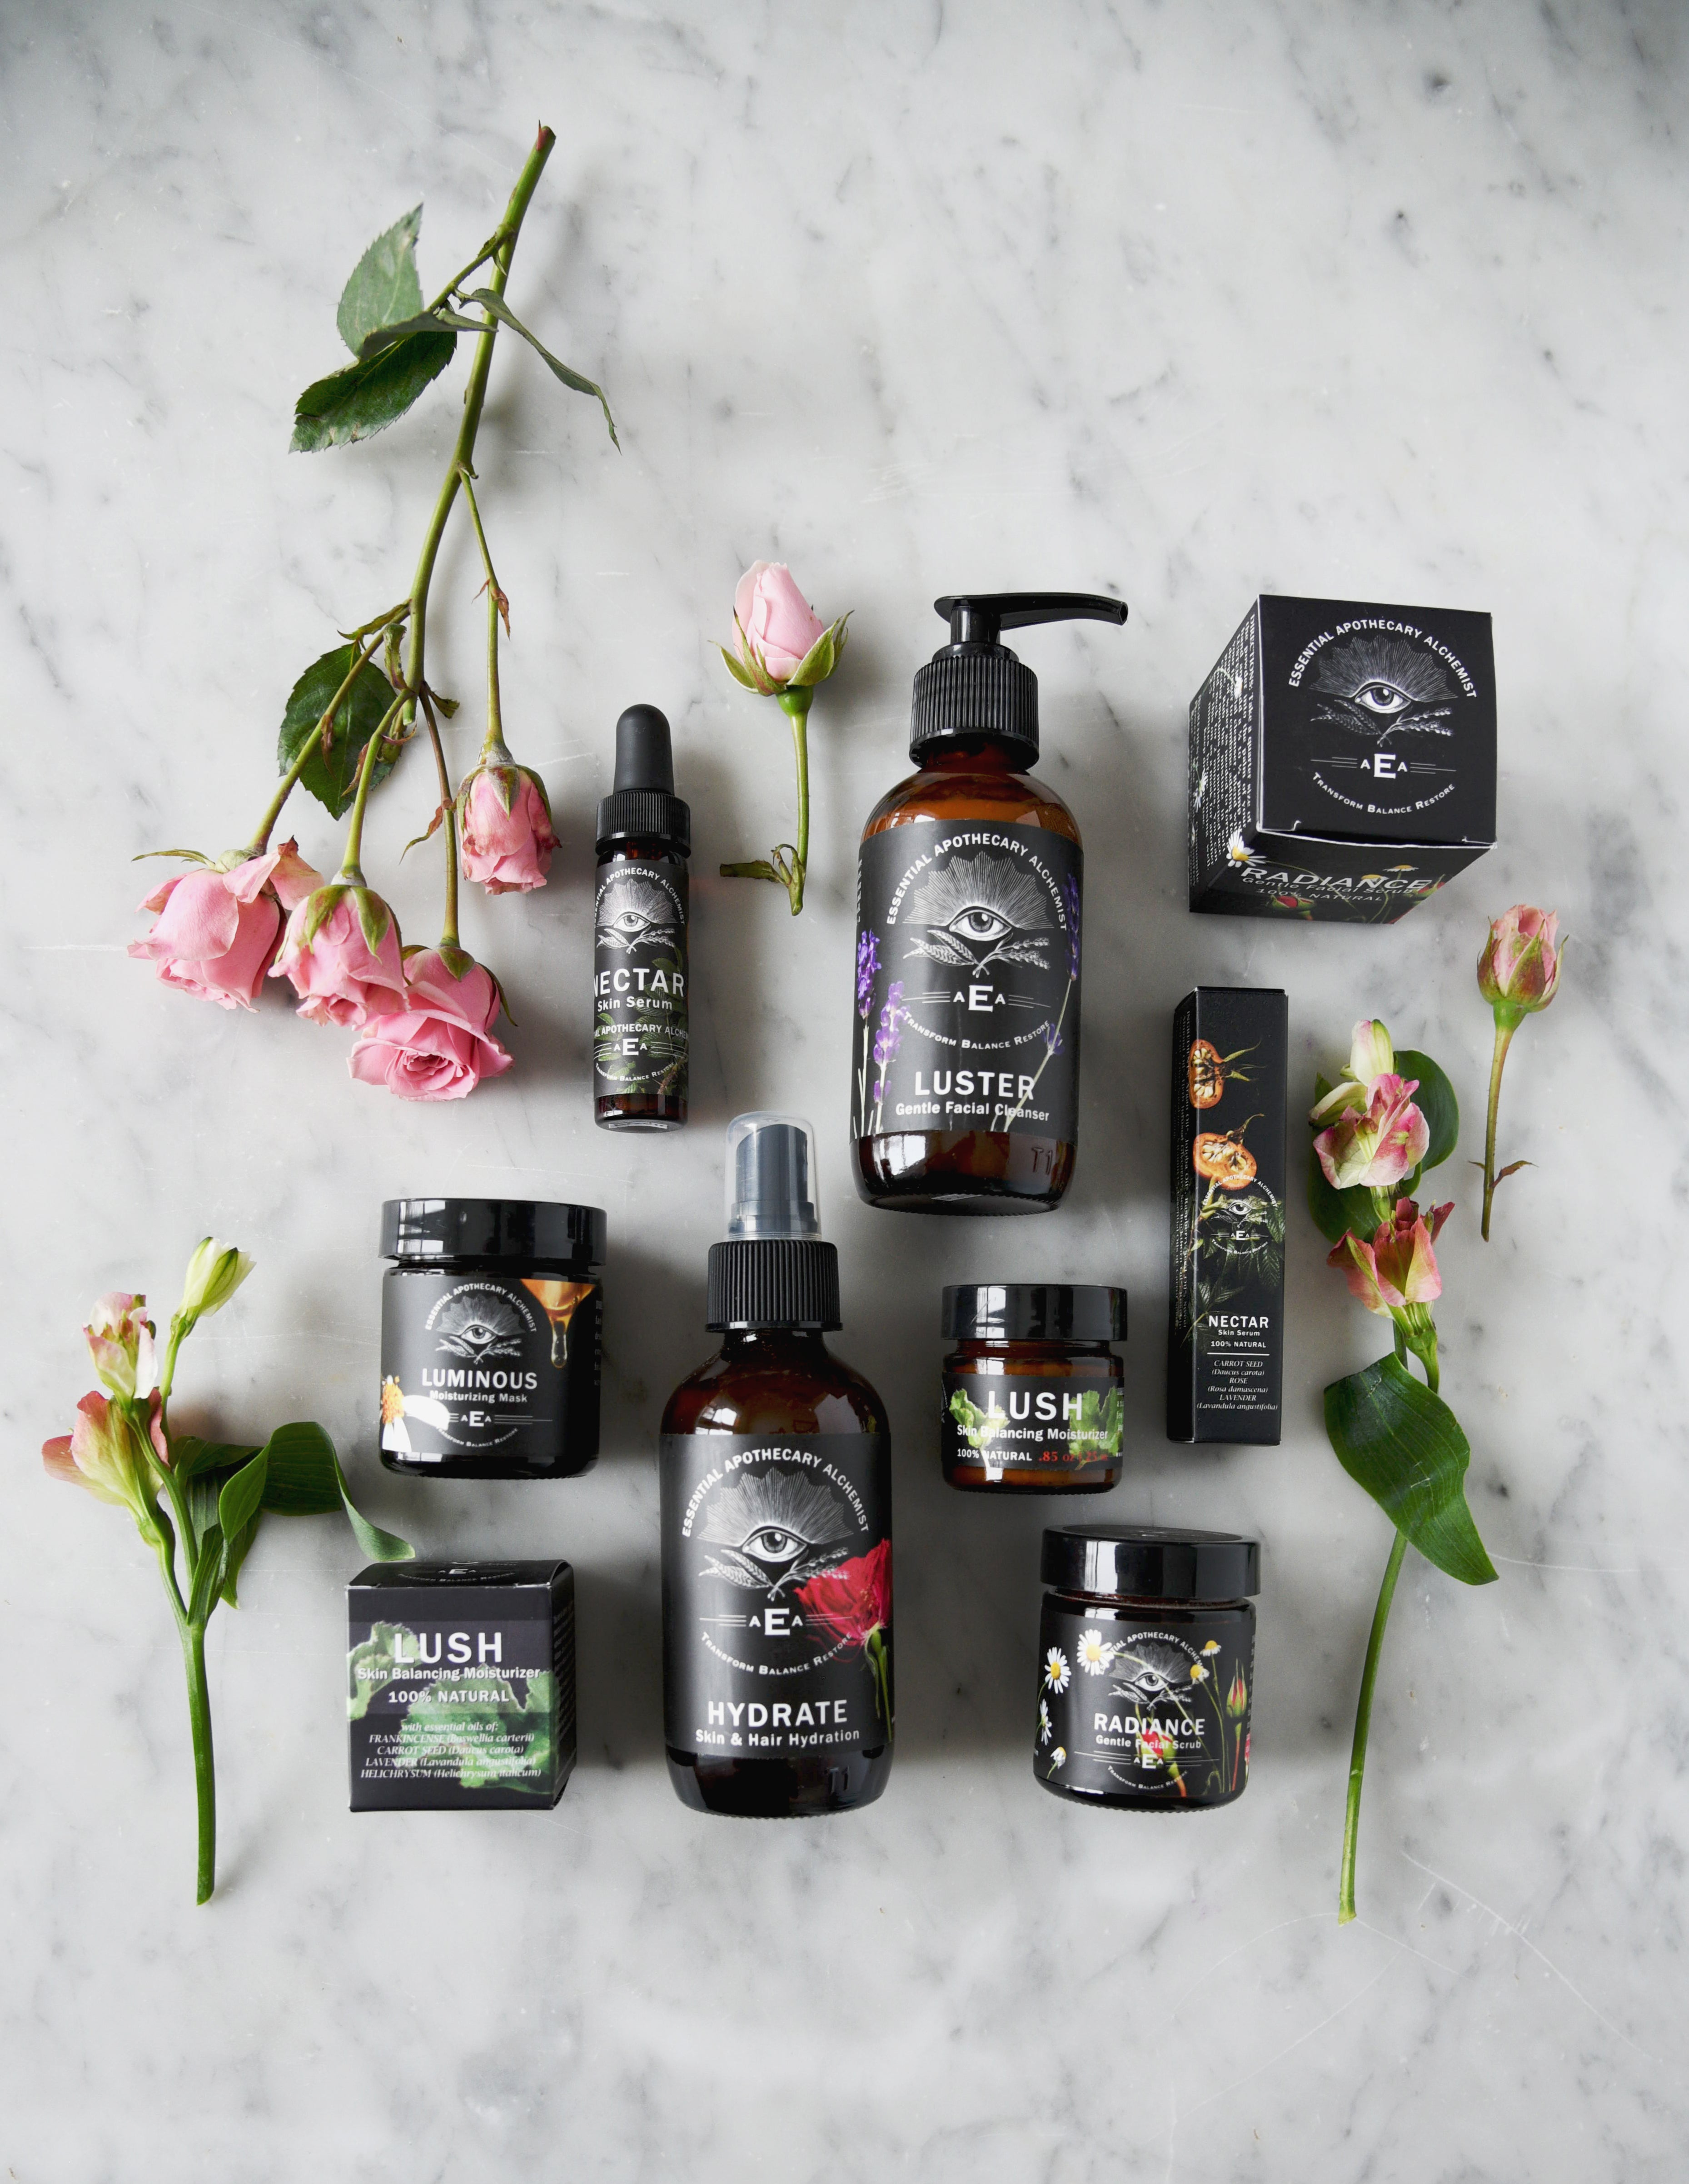 EAA skincare range styled with florals